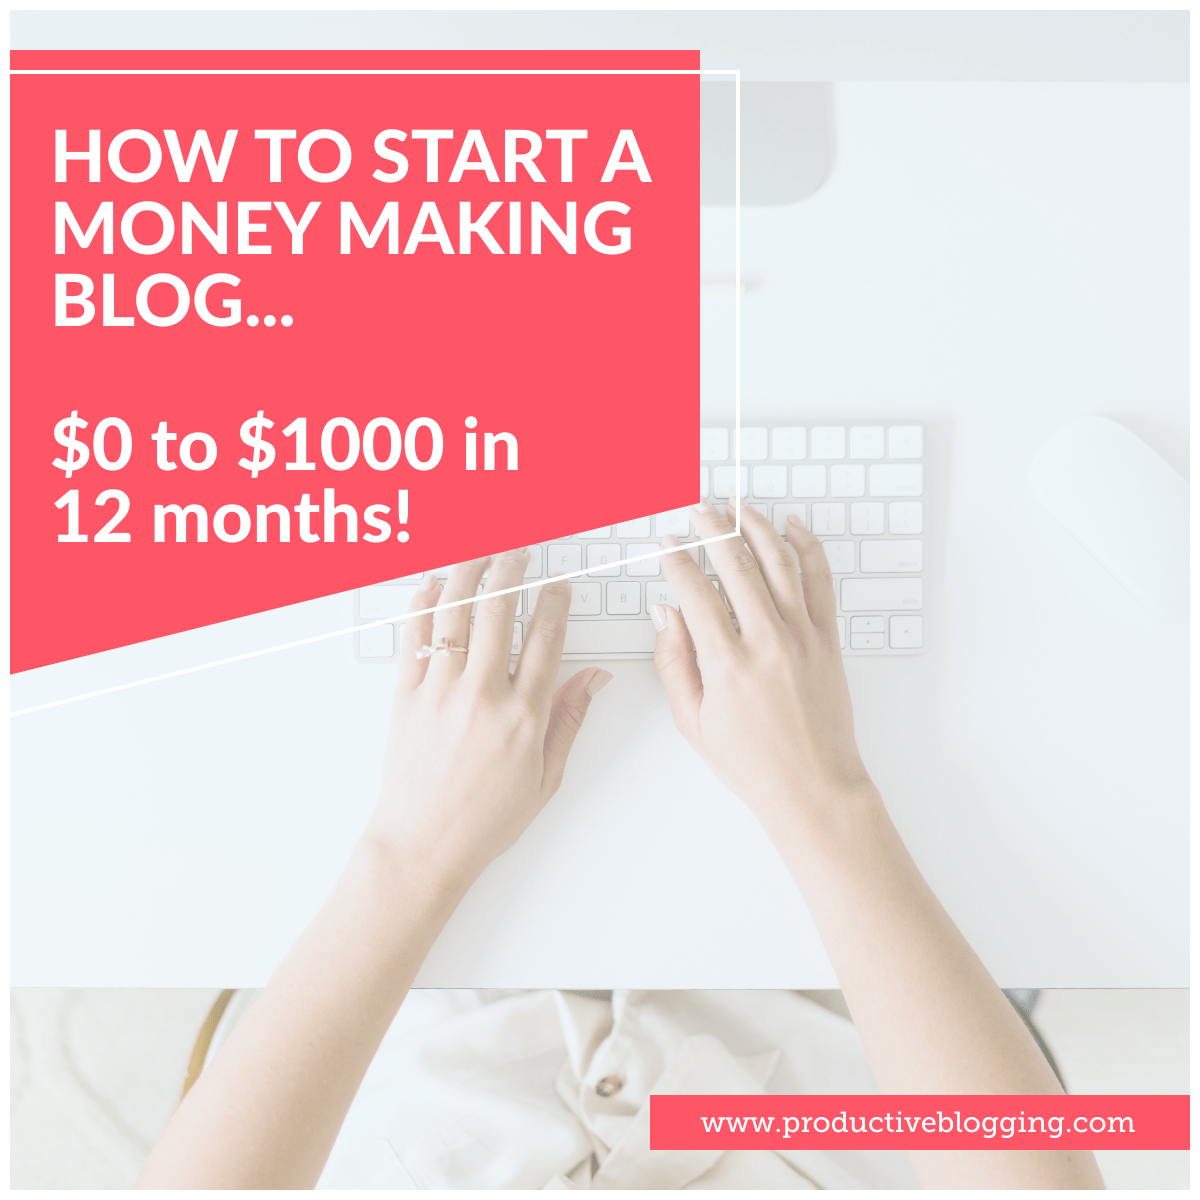 How to start a money making blog $0-$1000 in 12 months!